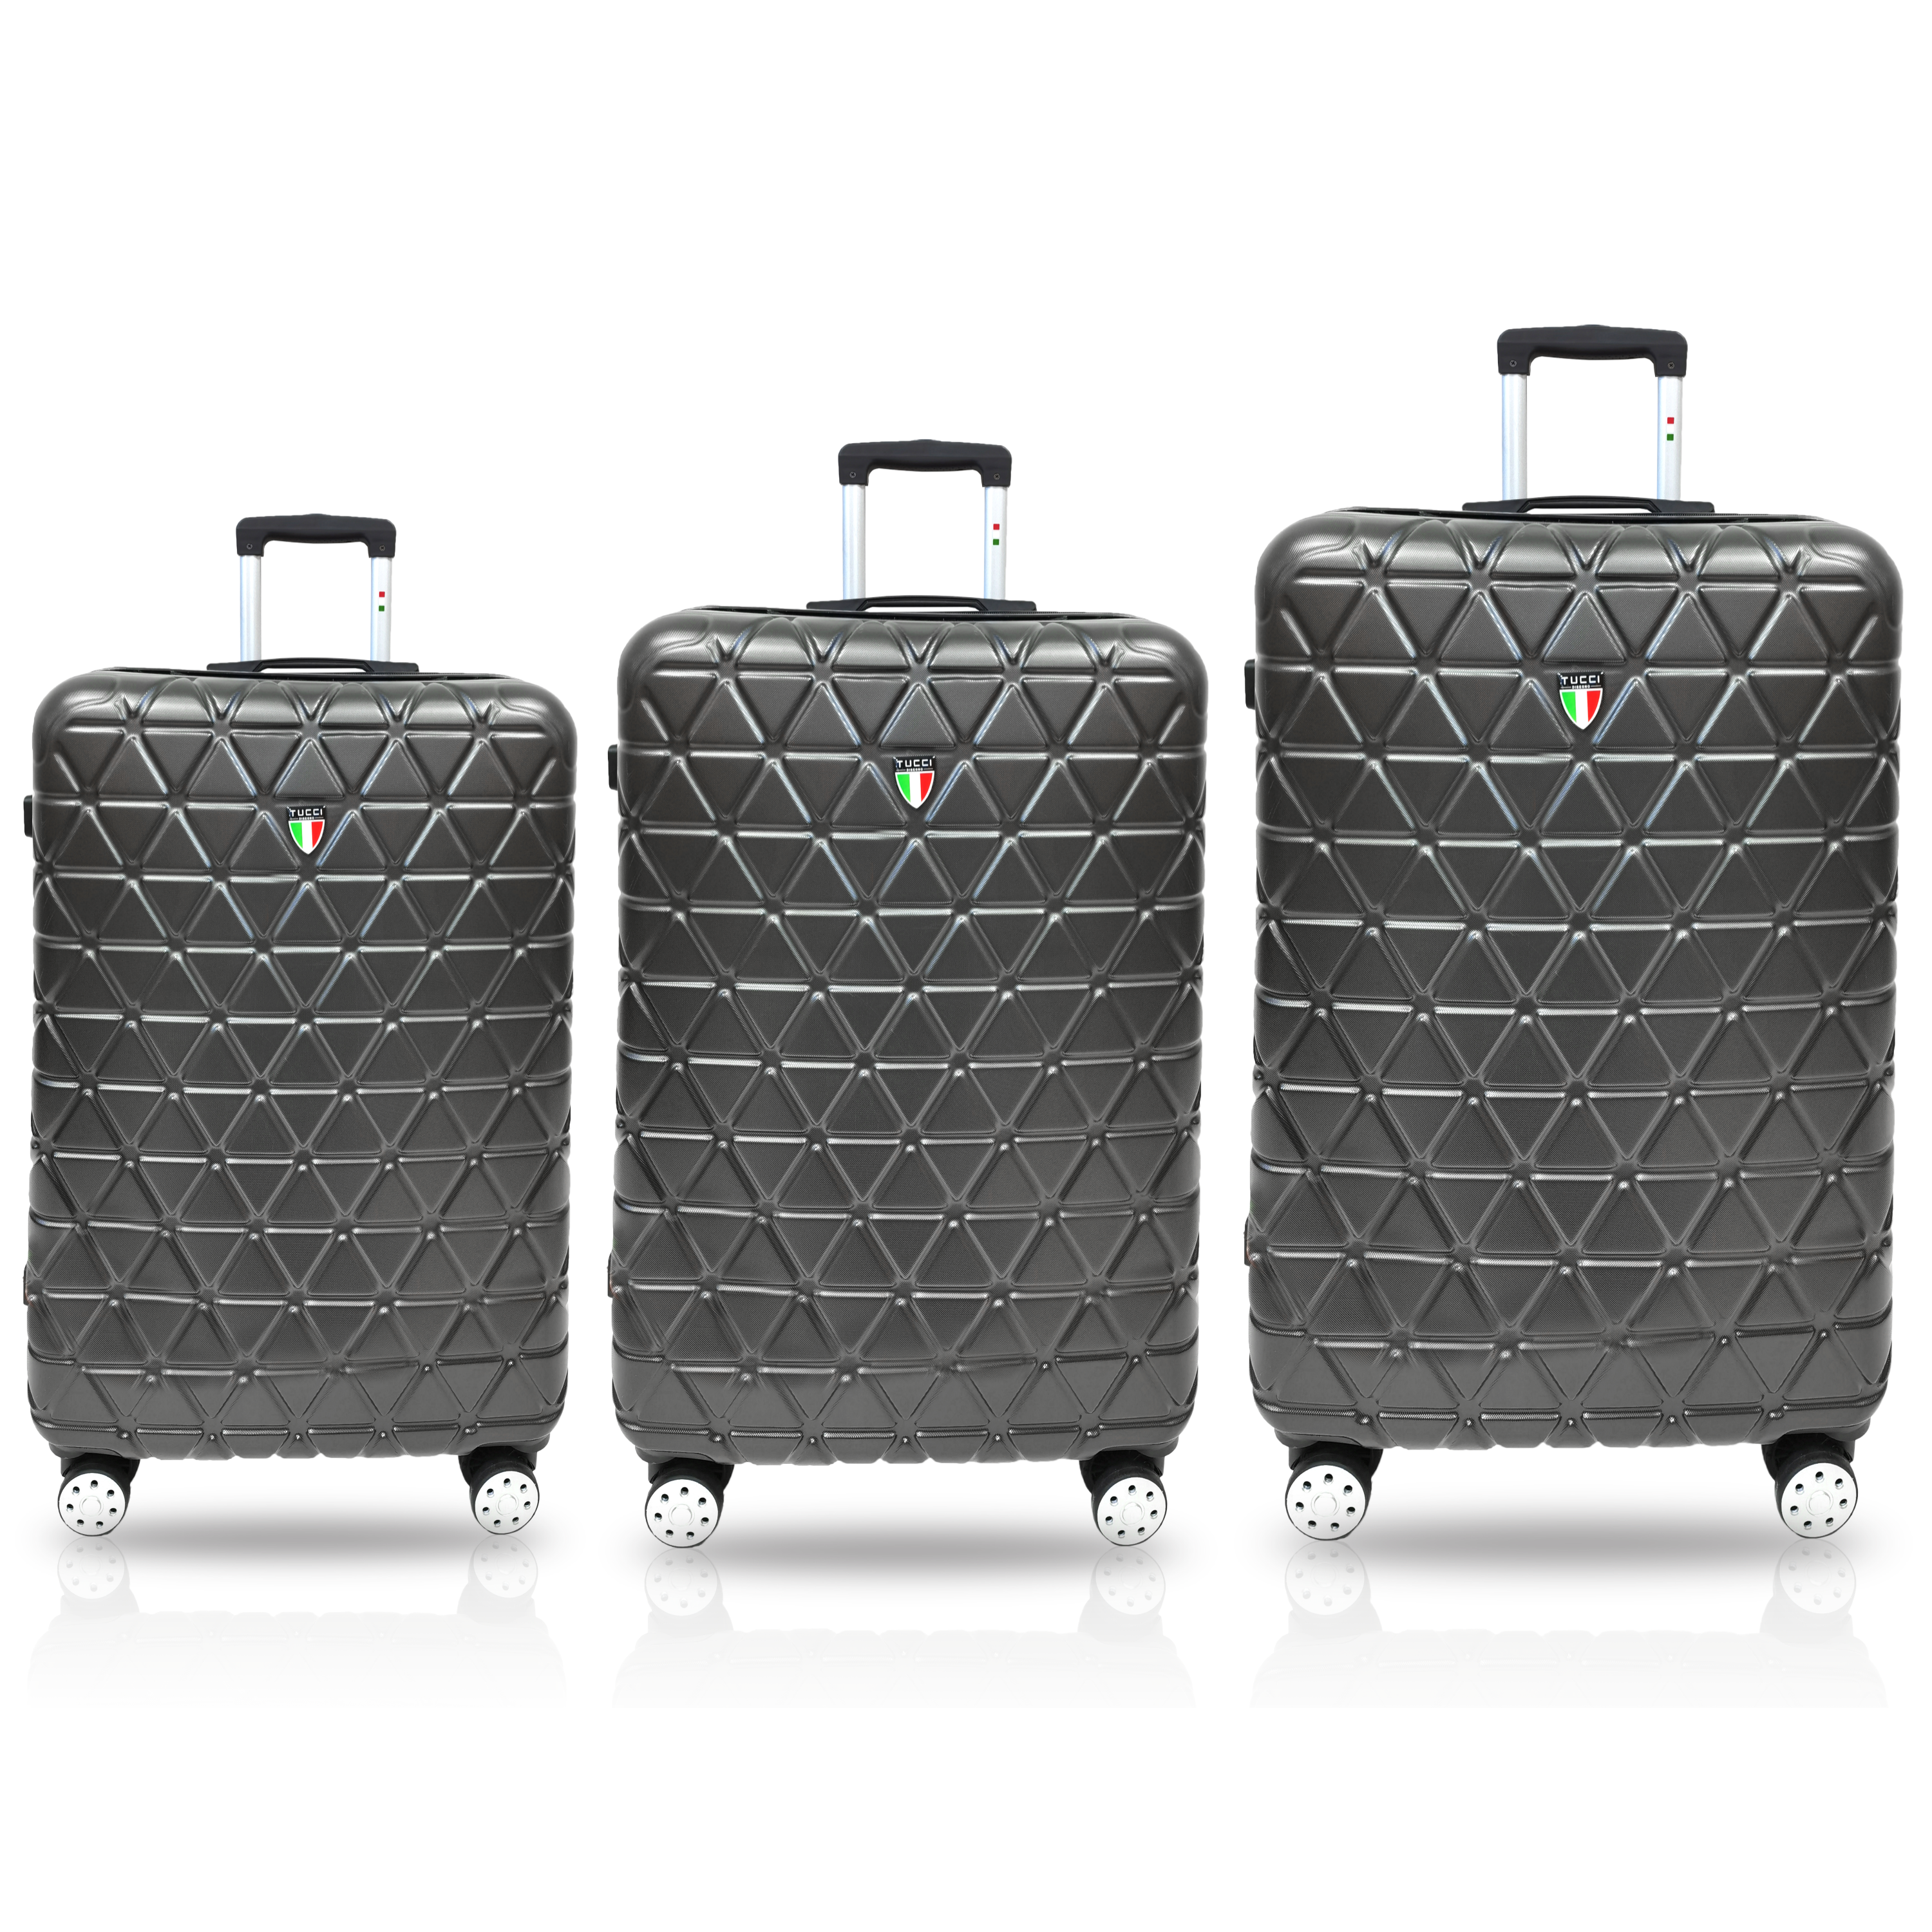 TUCCI Italy TESSERE ABS 3 PC (20", 24", 28") Luggage Set